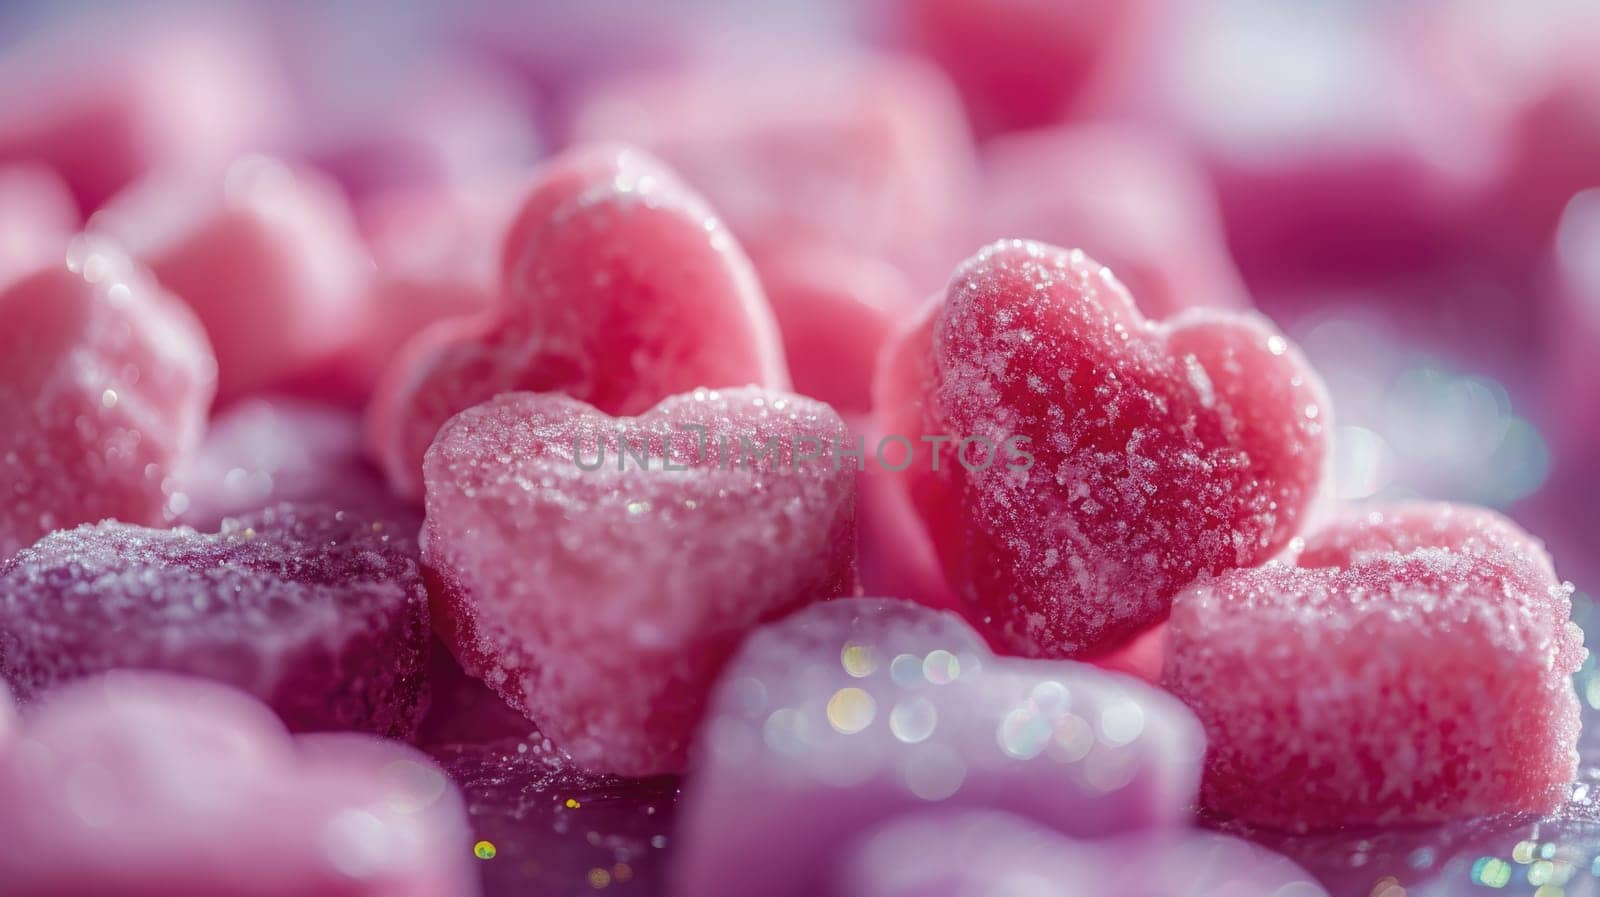 A close up view of heart shape pink sweet like candy, sugar, and jelly. AIGX01. by biancoblue